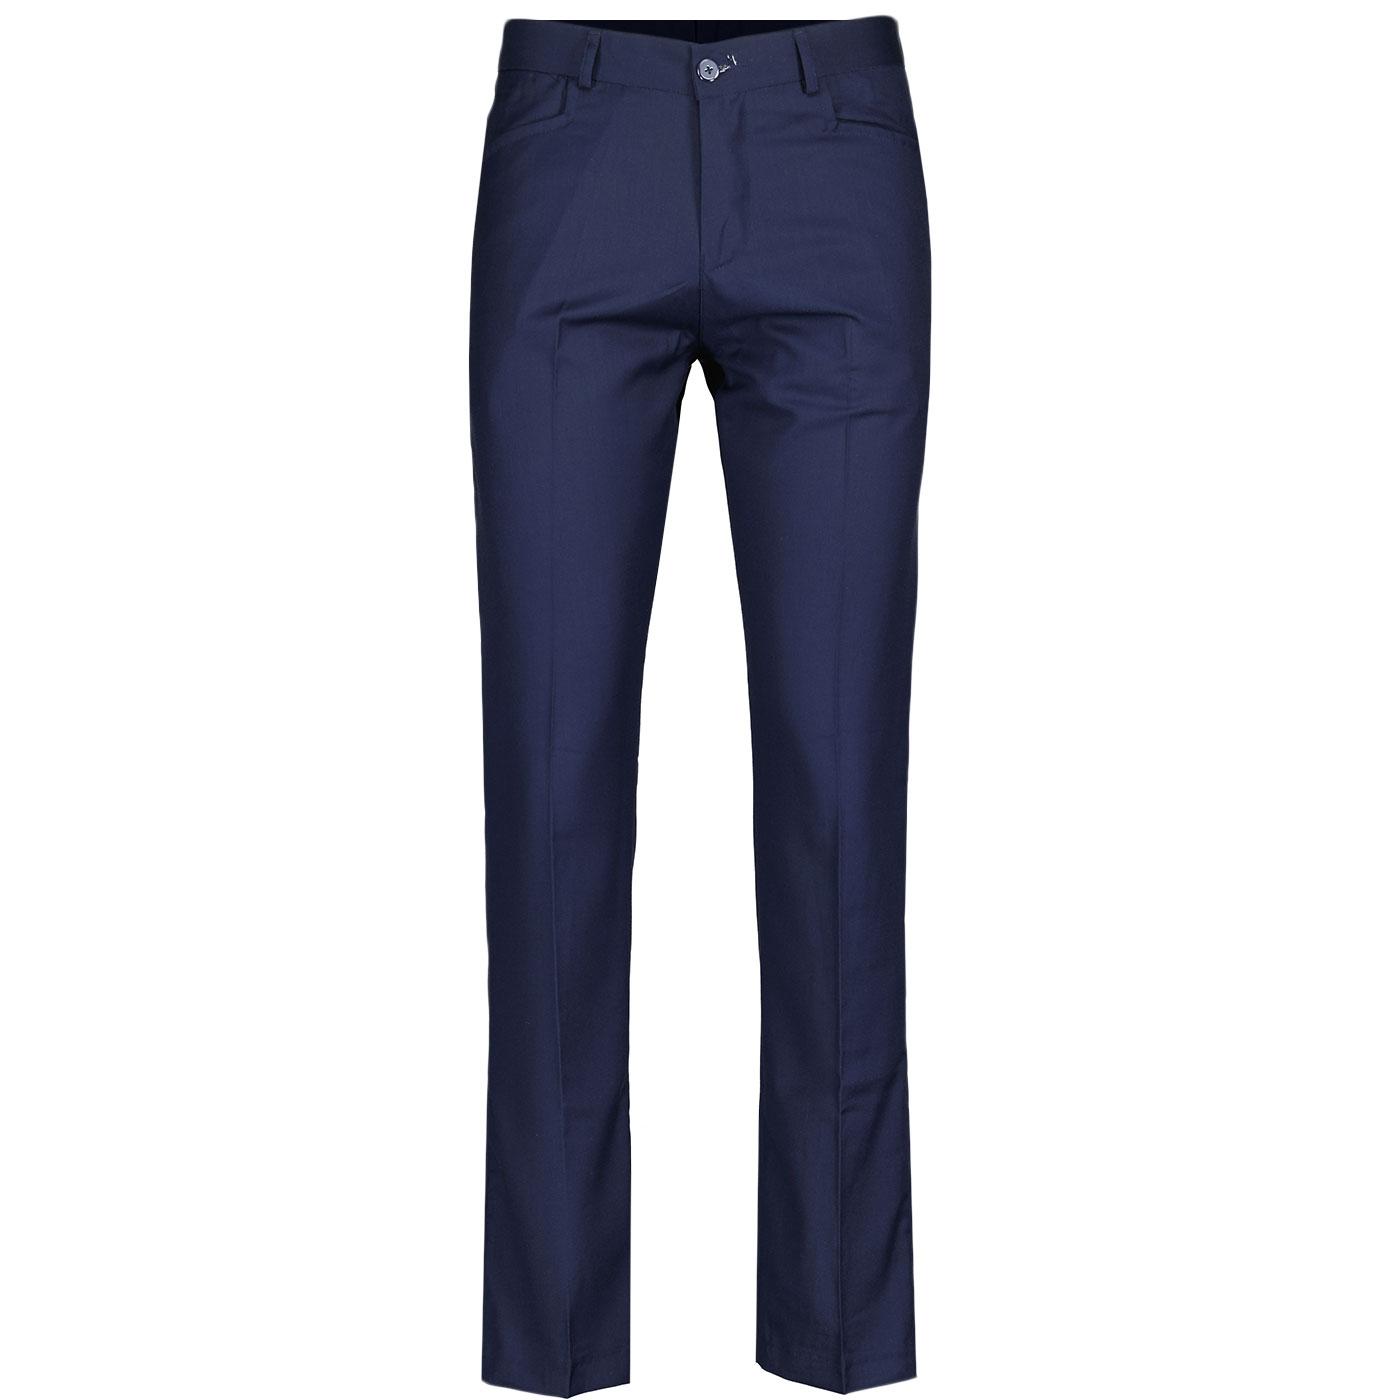 Madcap England Mod Frogmouth Pocket Suit Trousers in Navy